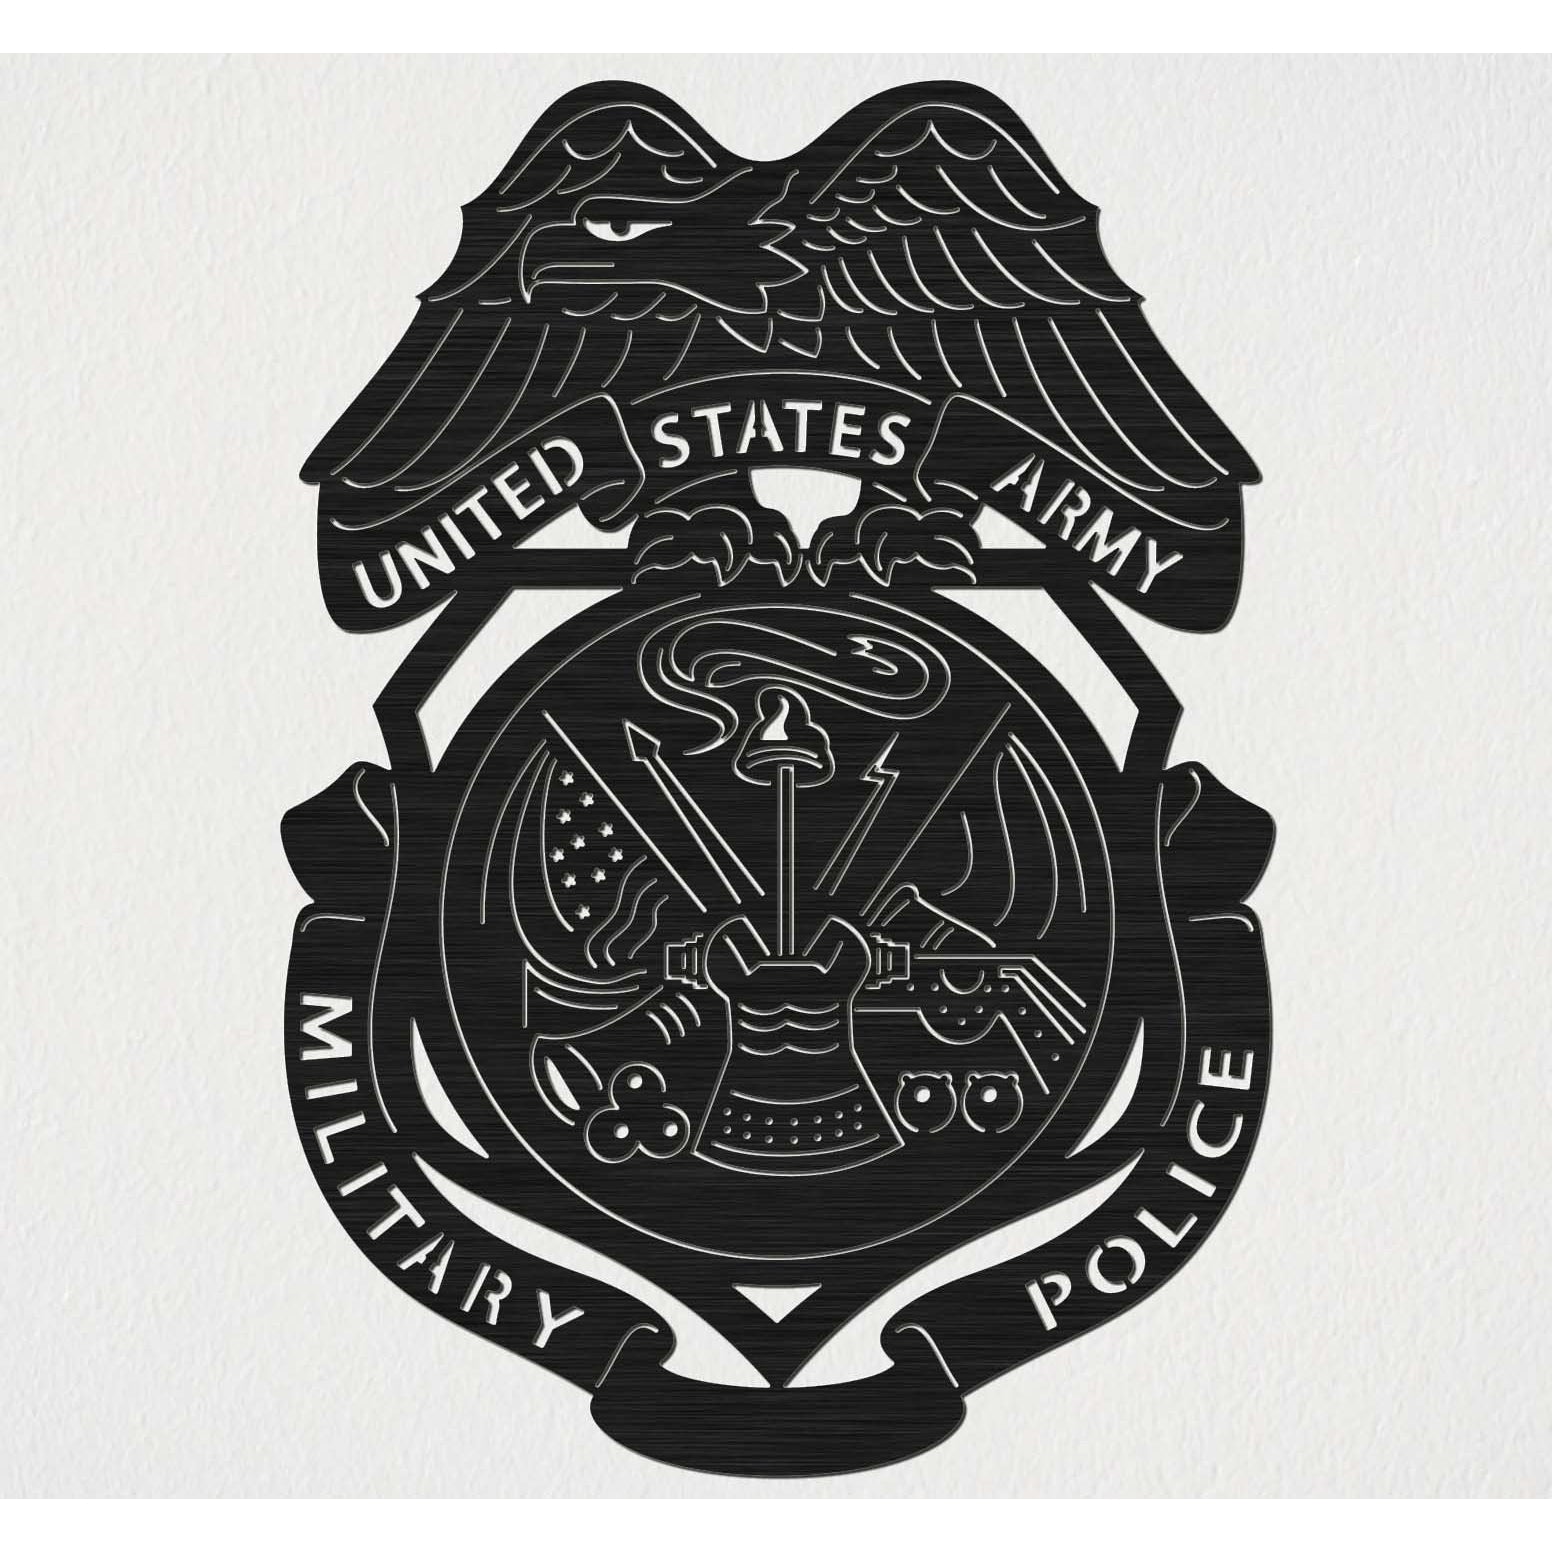 United States Army Military and Police Corps with Eagle Badge-DXFforCNC.com-DXF Files cut ready cnc machines